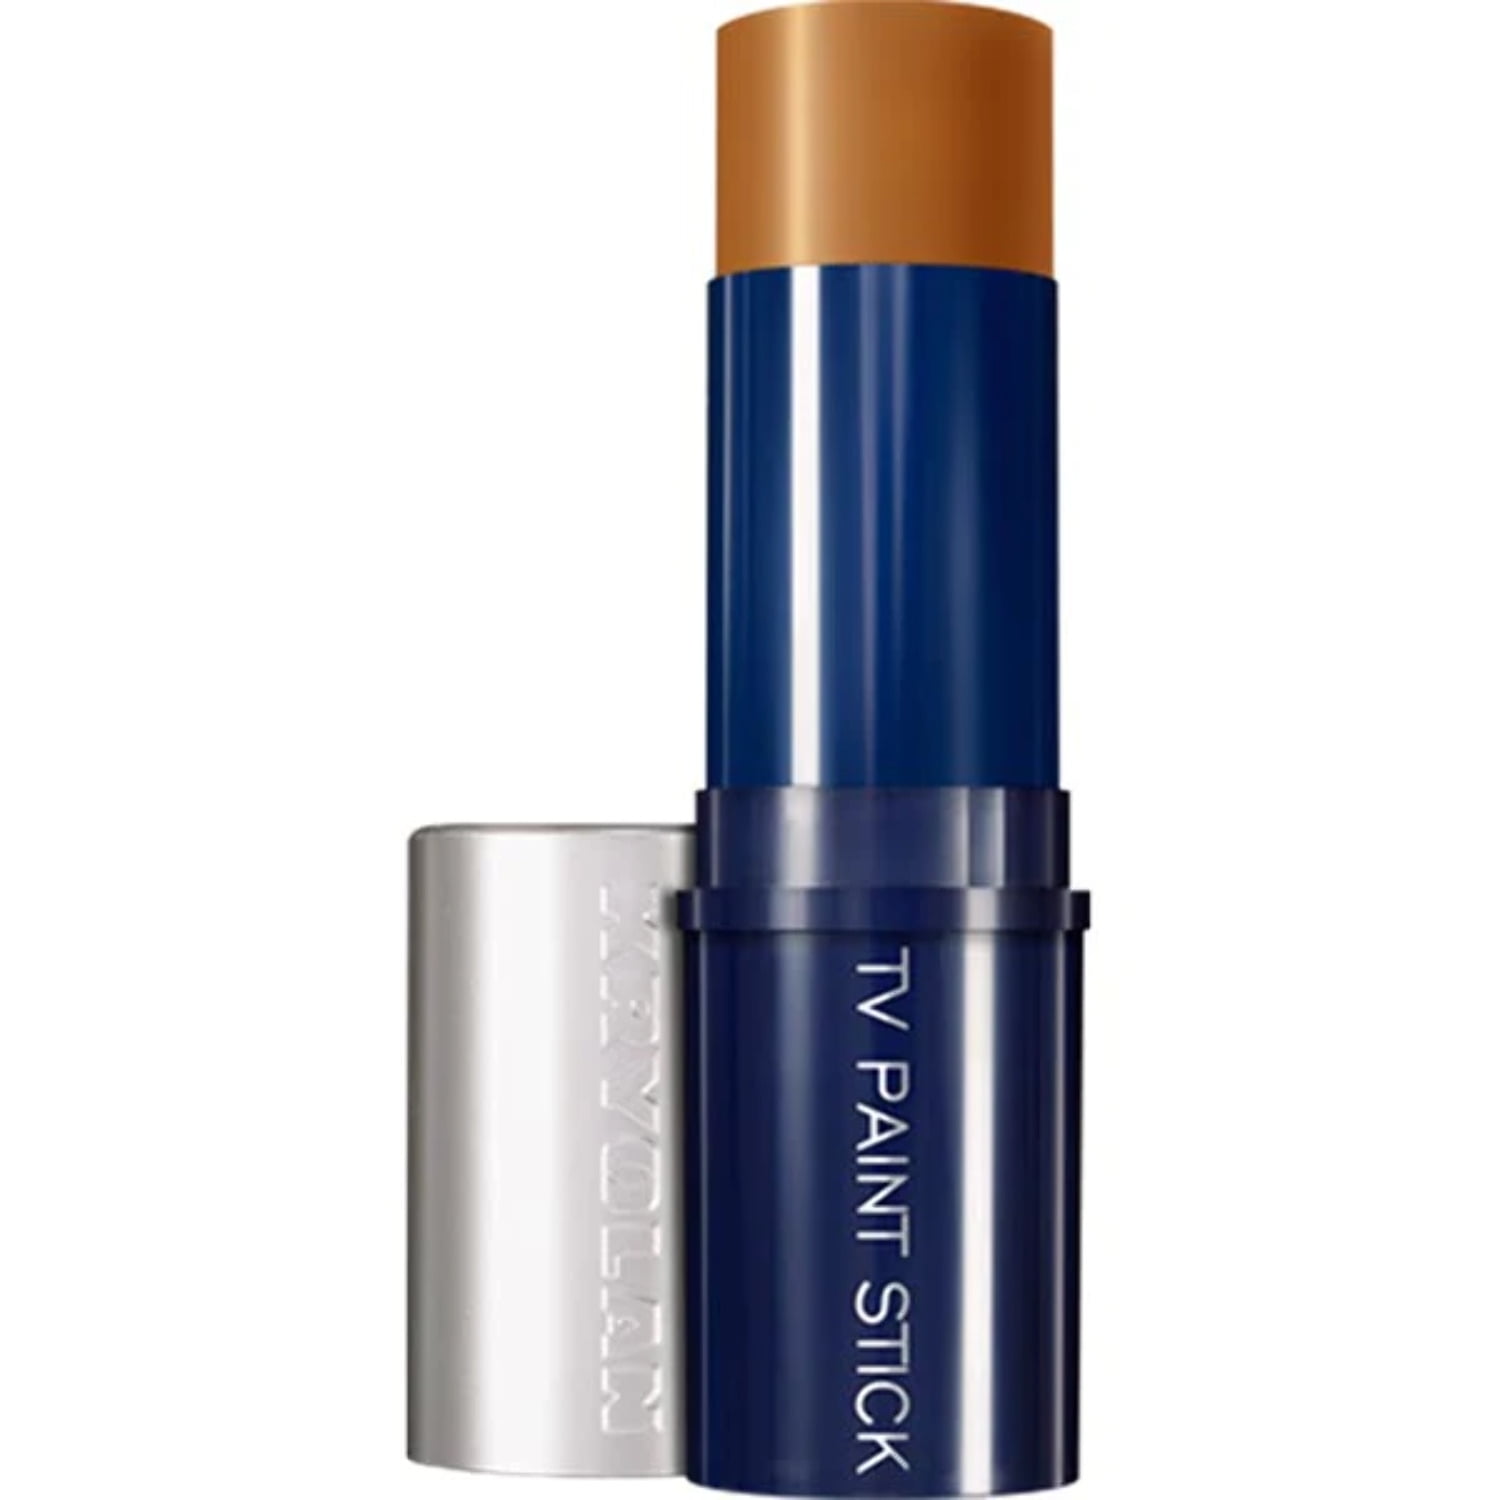 KRYOLAN TV Paint Stick Concealer - Price in India, Buy KRYOLAN TV Paint  Stick Concealer Online In India, Reviews, Ratings & Features